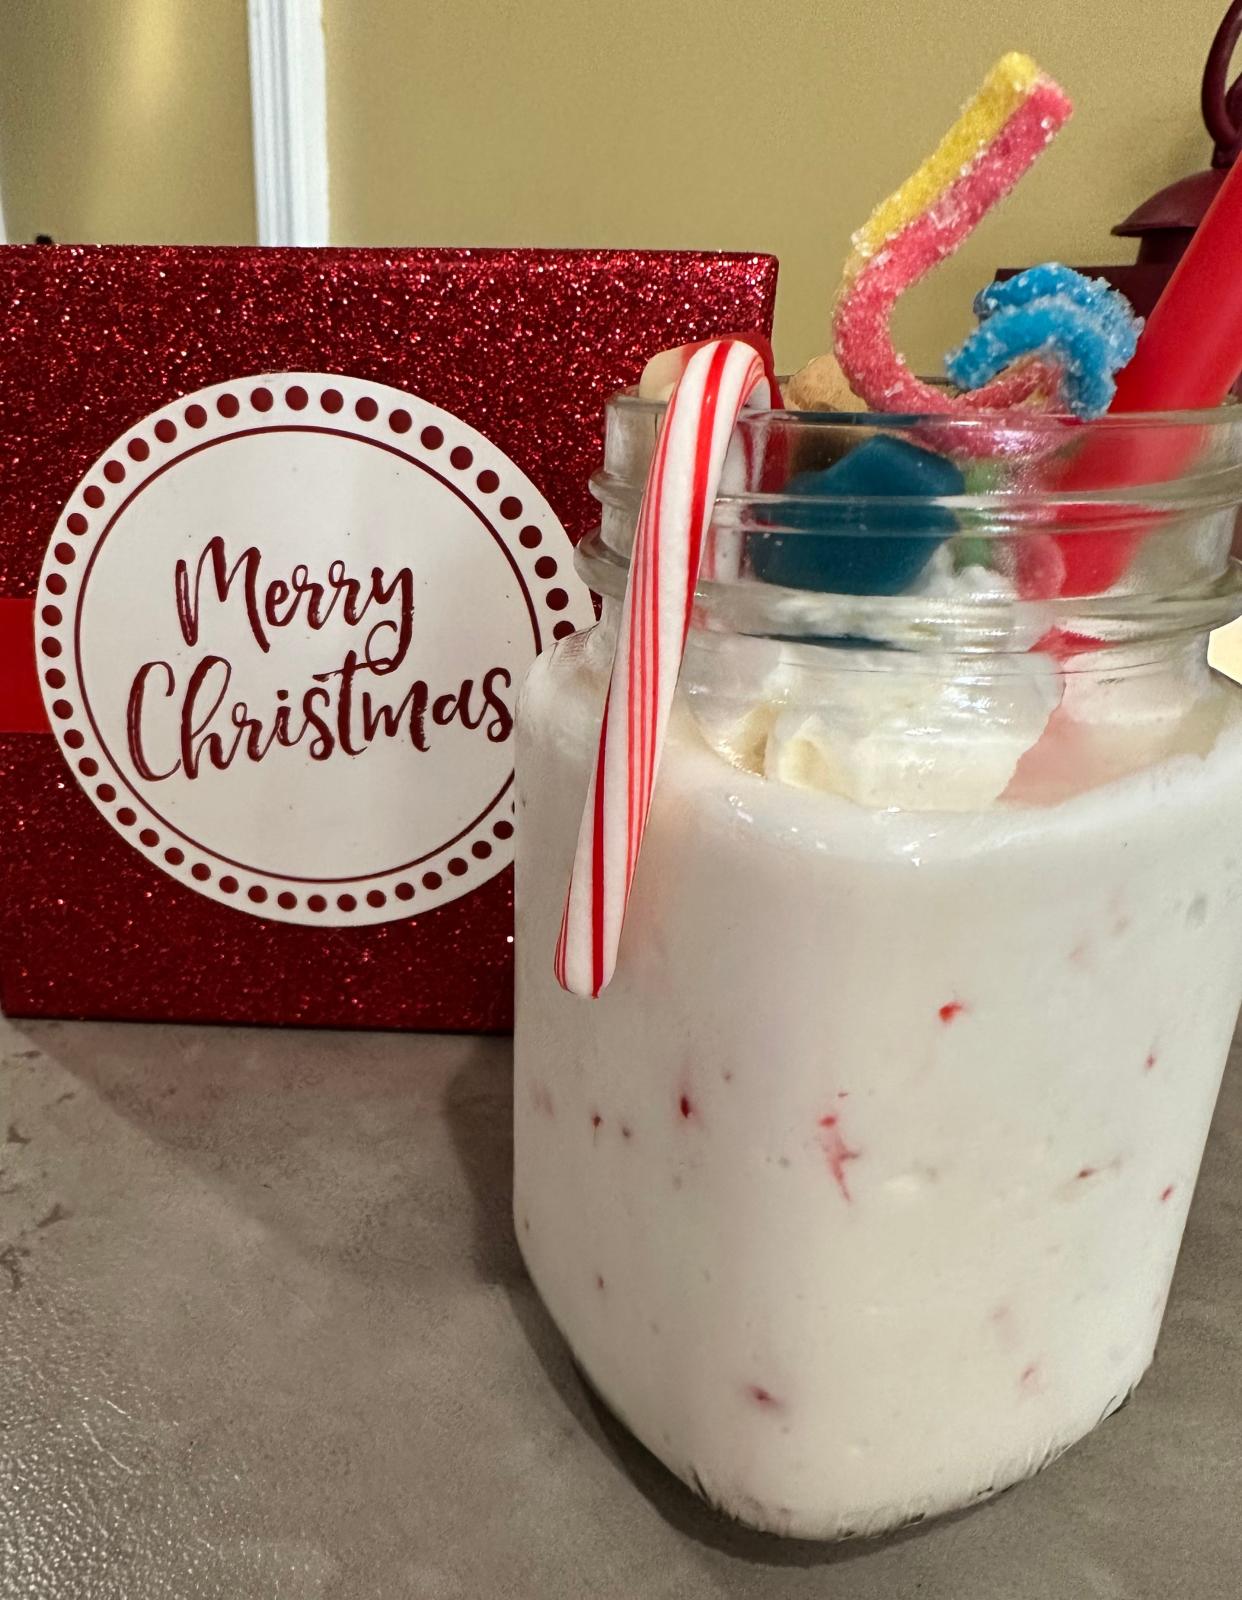 The Buddy the Elf Shake is a fun, non-alcoholic drink available at Fizzlestix in Massillon.